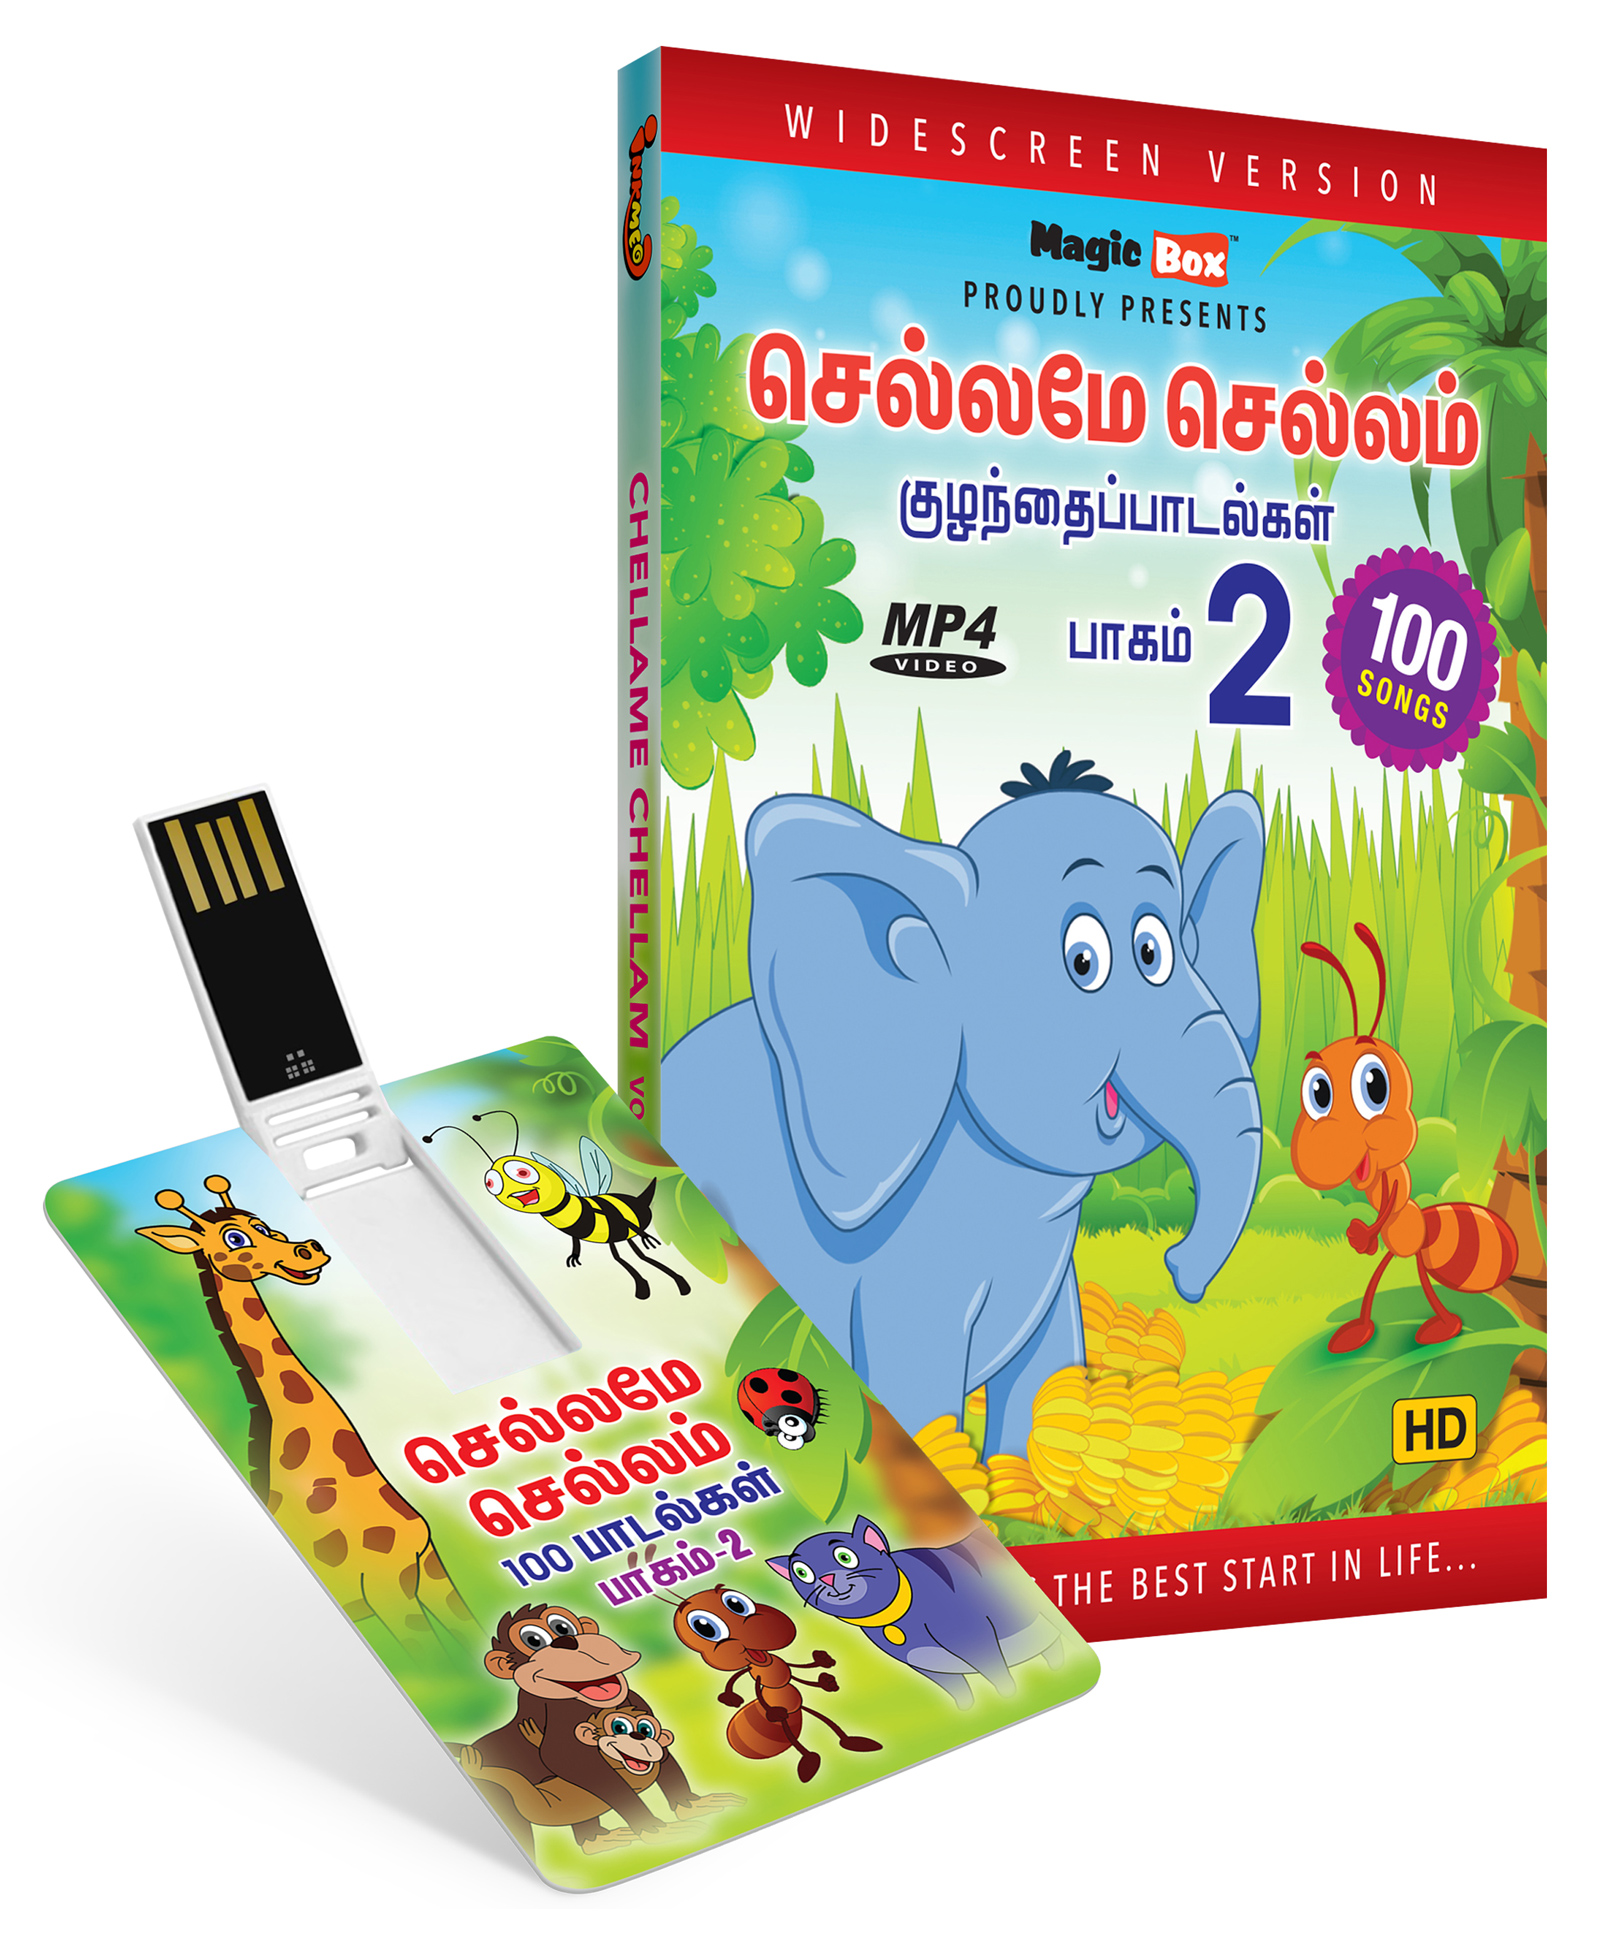 Inkmeo USB Memory Stick Animated Tamil Rhymes Chellame Chellame Volume 2 -  Tamil Online in India, Buy at Best Price from  - 8476691